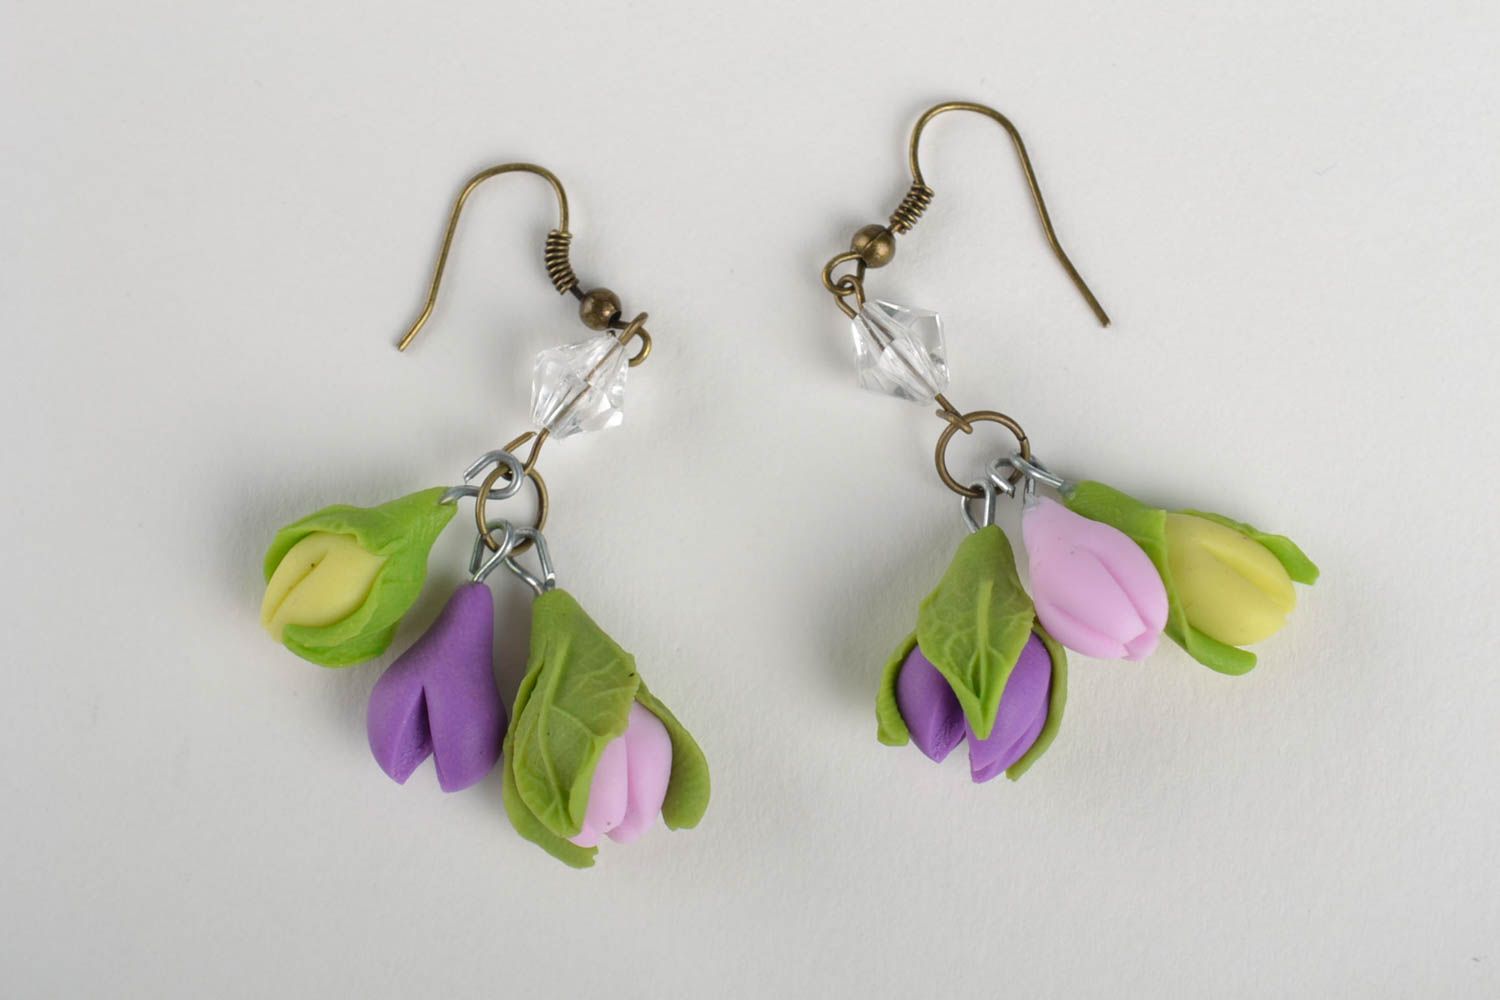 Dangling earrings flower jewelry handmade earrings polymer clay gifts for her photo 2